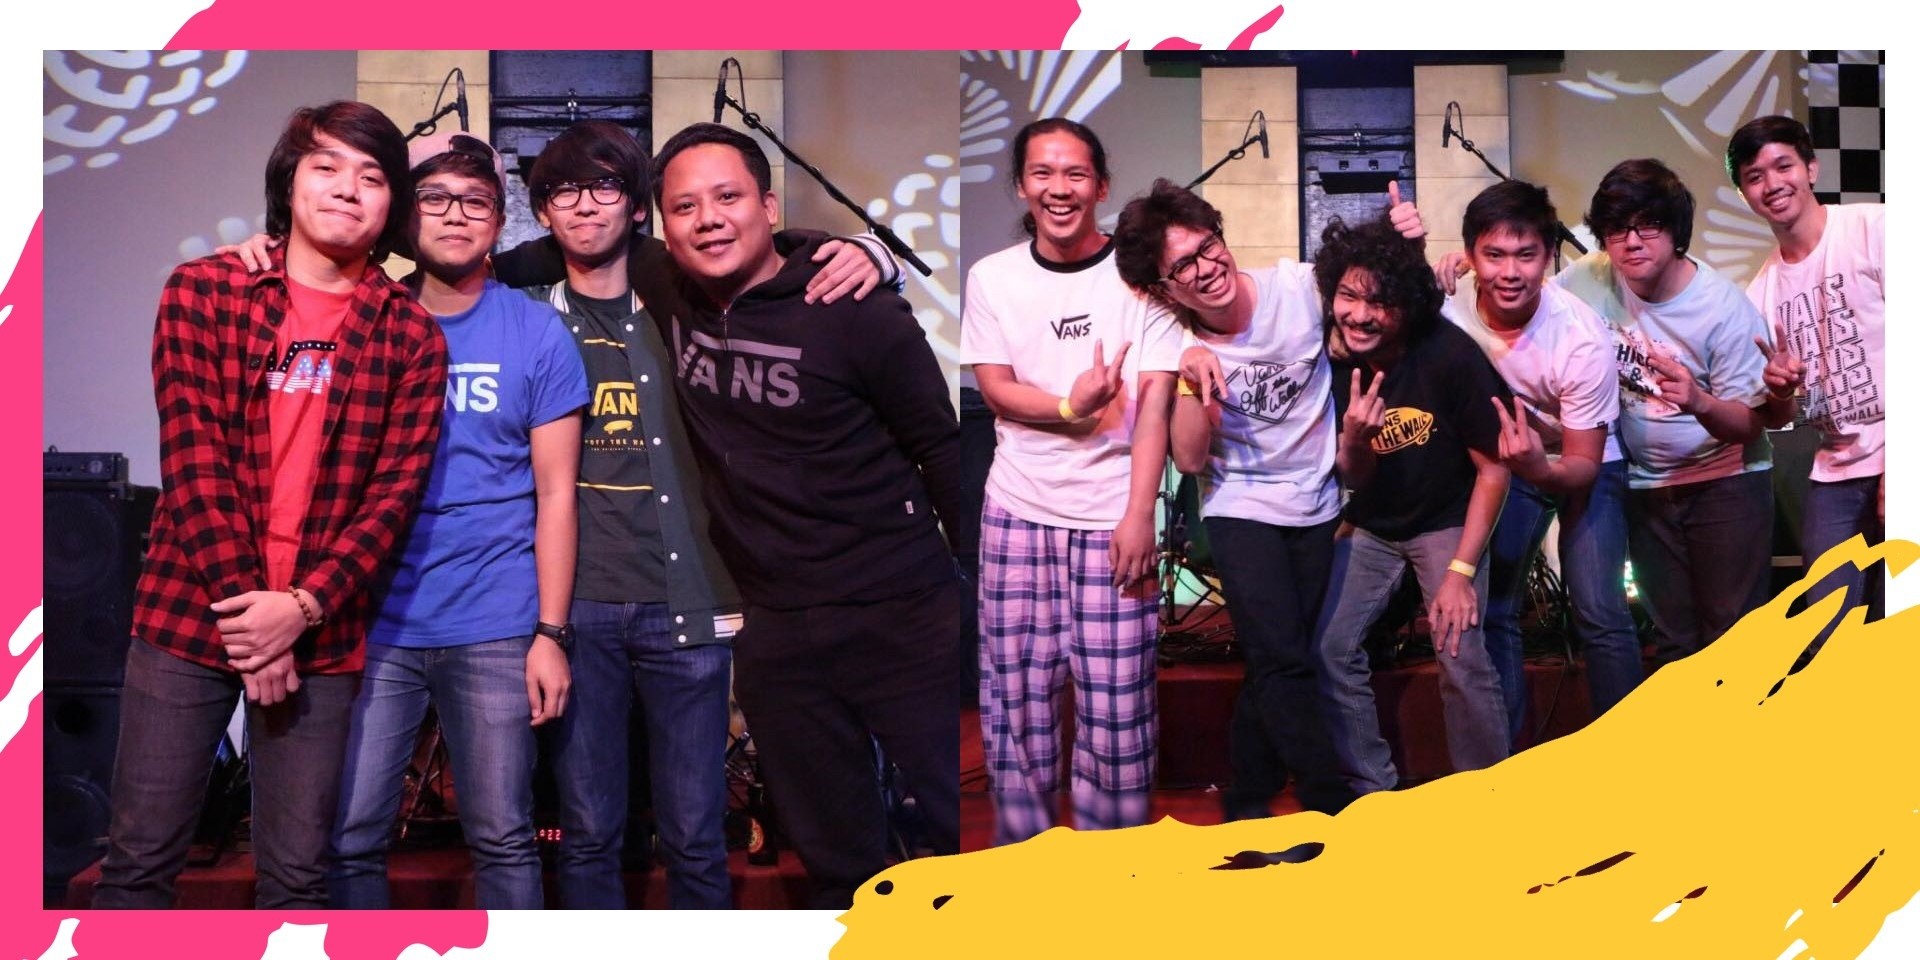 Vans Philippines announces Top 5 finalists of Musicians Wanted